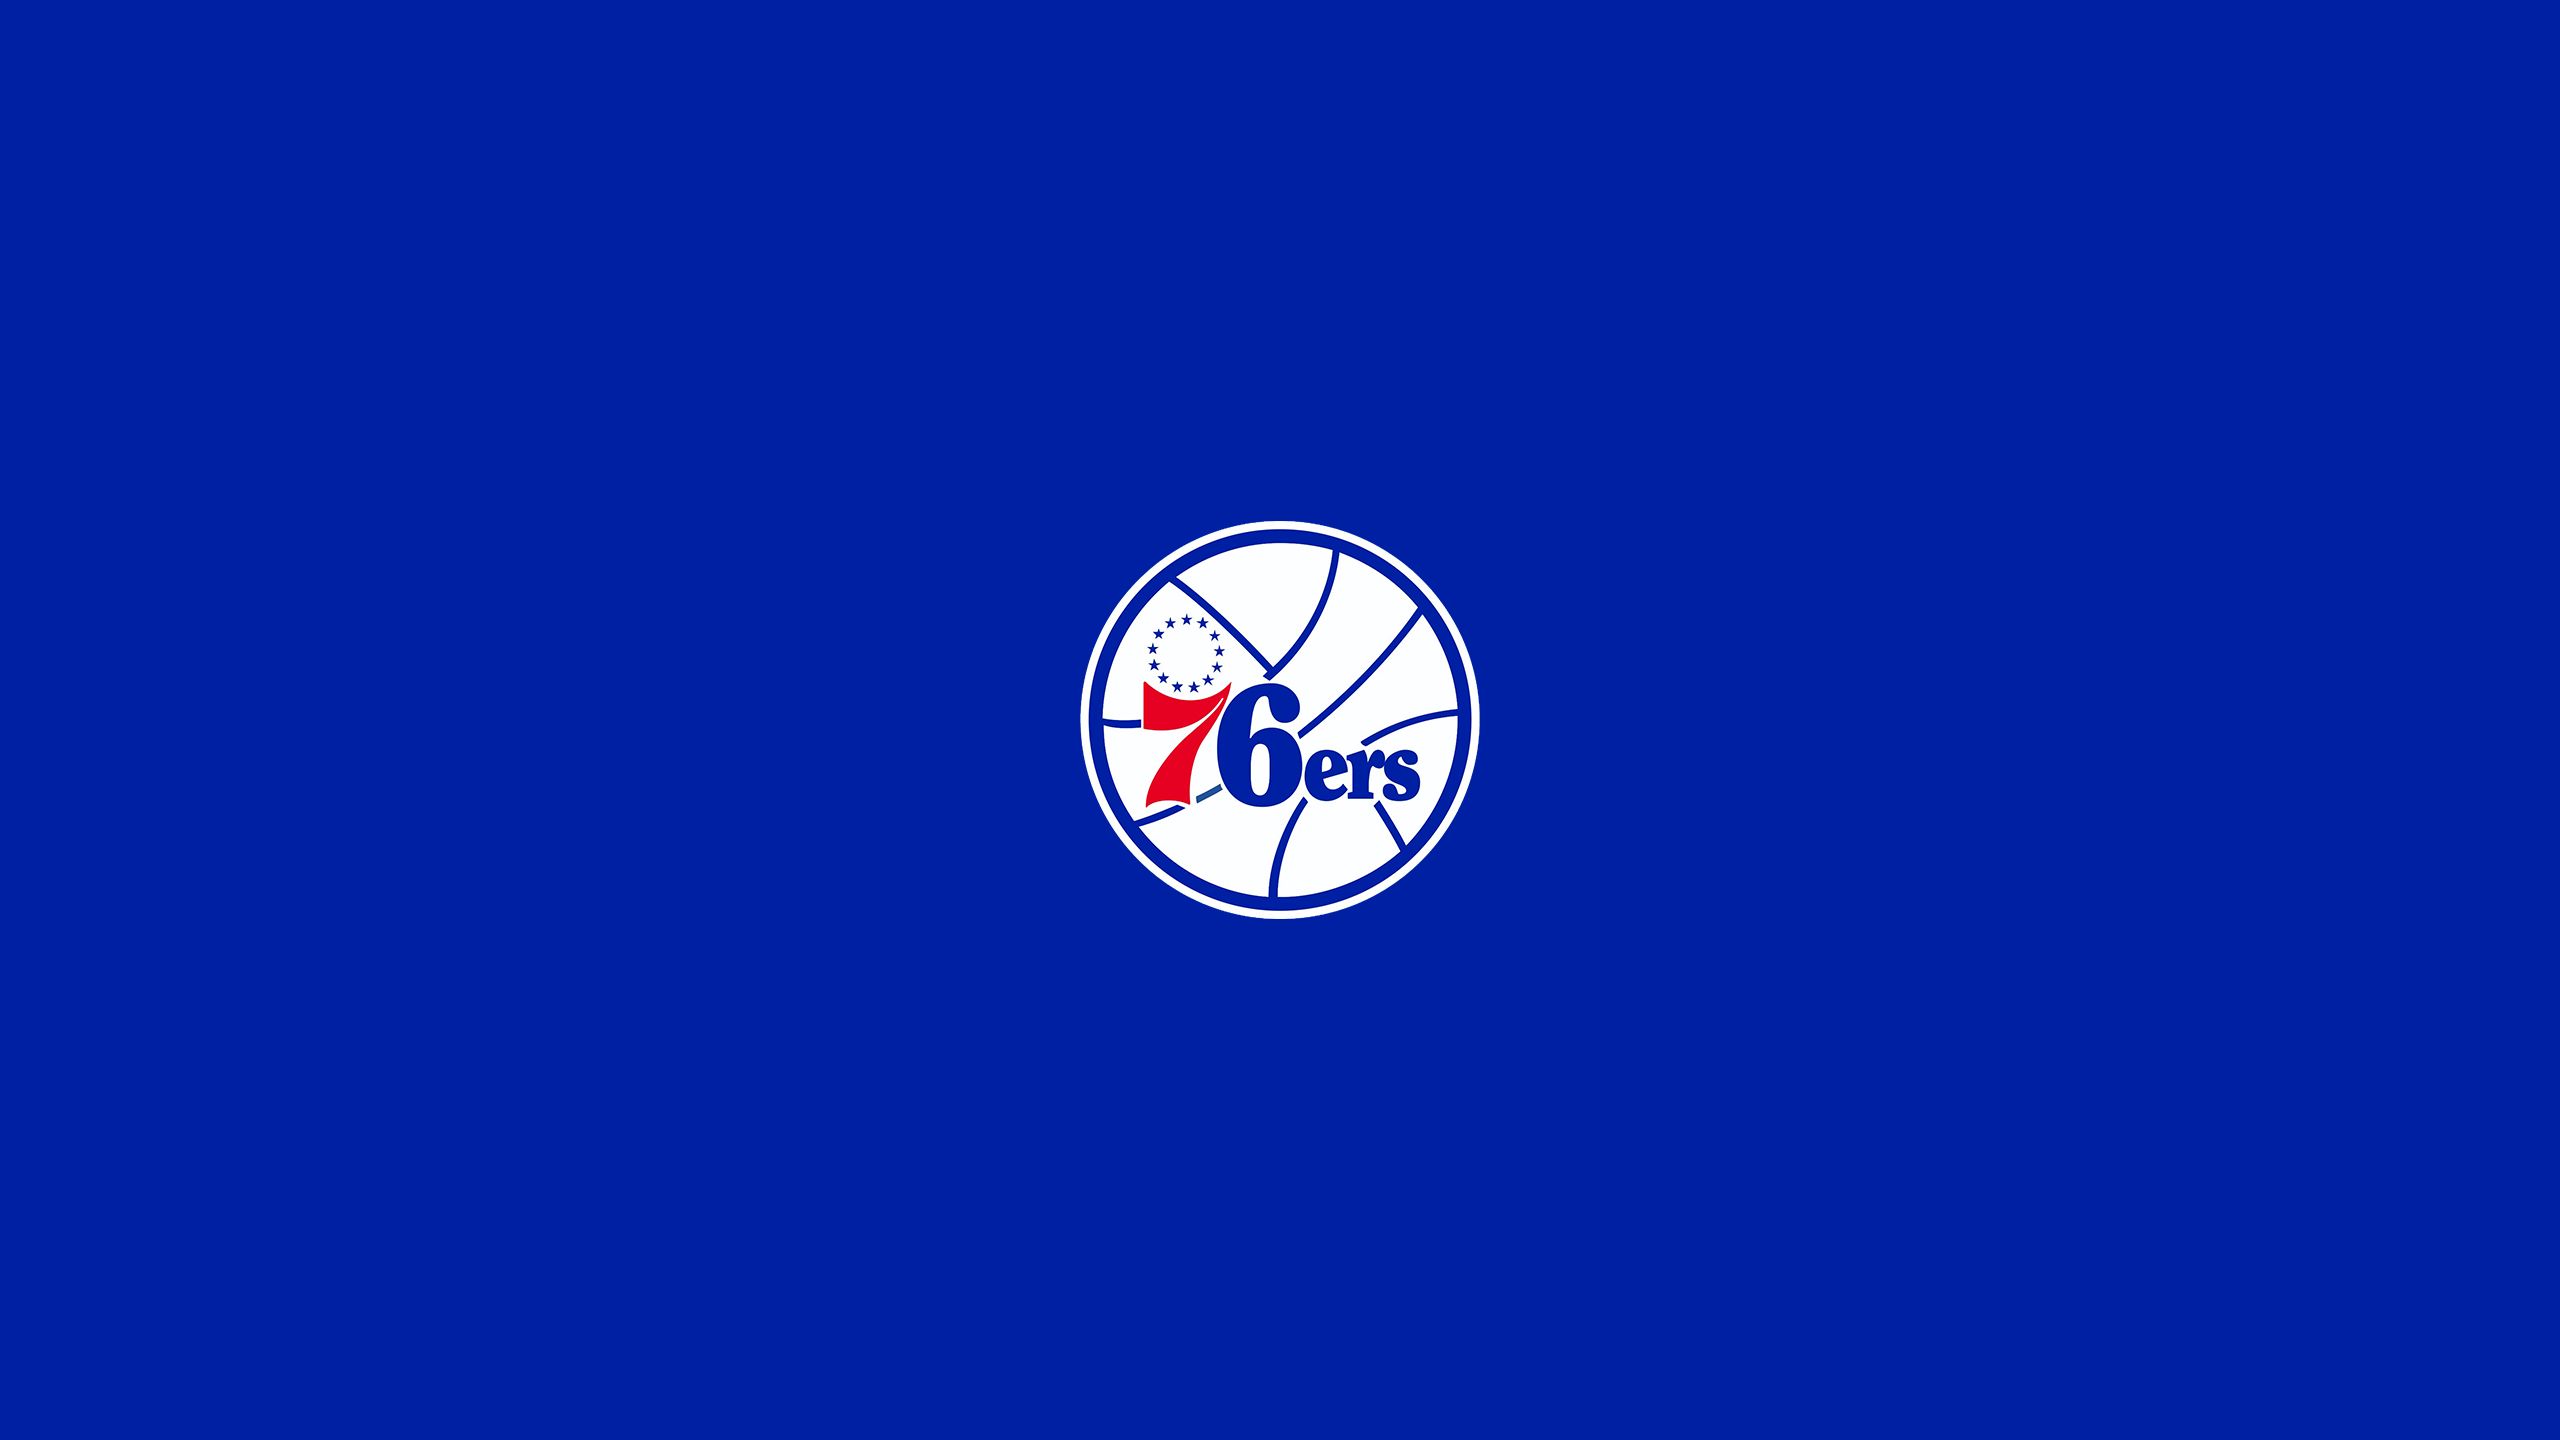 Download wallpapers 4k Philadelphia 76ers NBA wooden texture  basketball Eastern Conference USA emblem basketball club Philadelphia  76ers logo for desktop with resolution 3840x2400 High Quality HD pictures  wallpapers